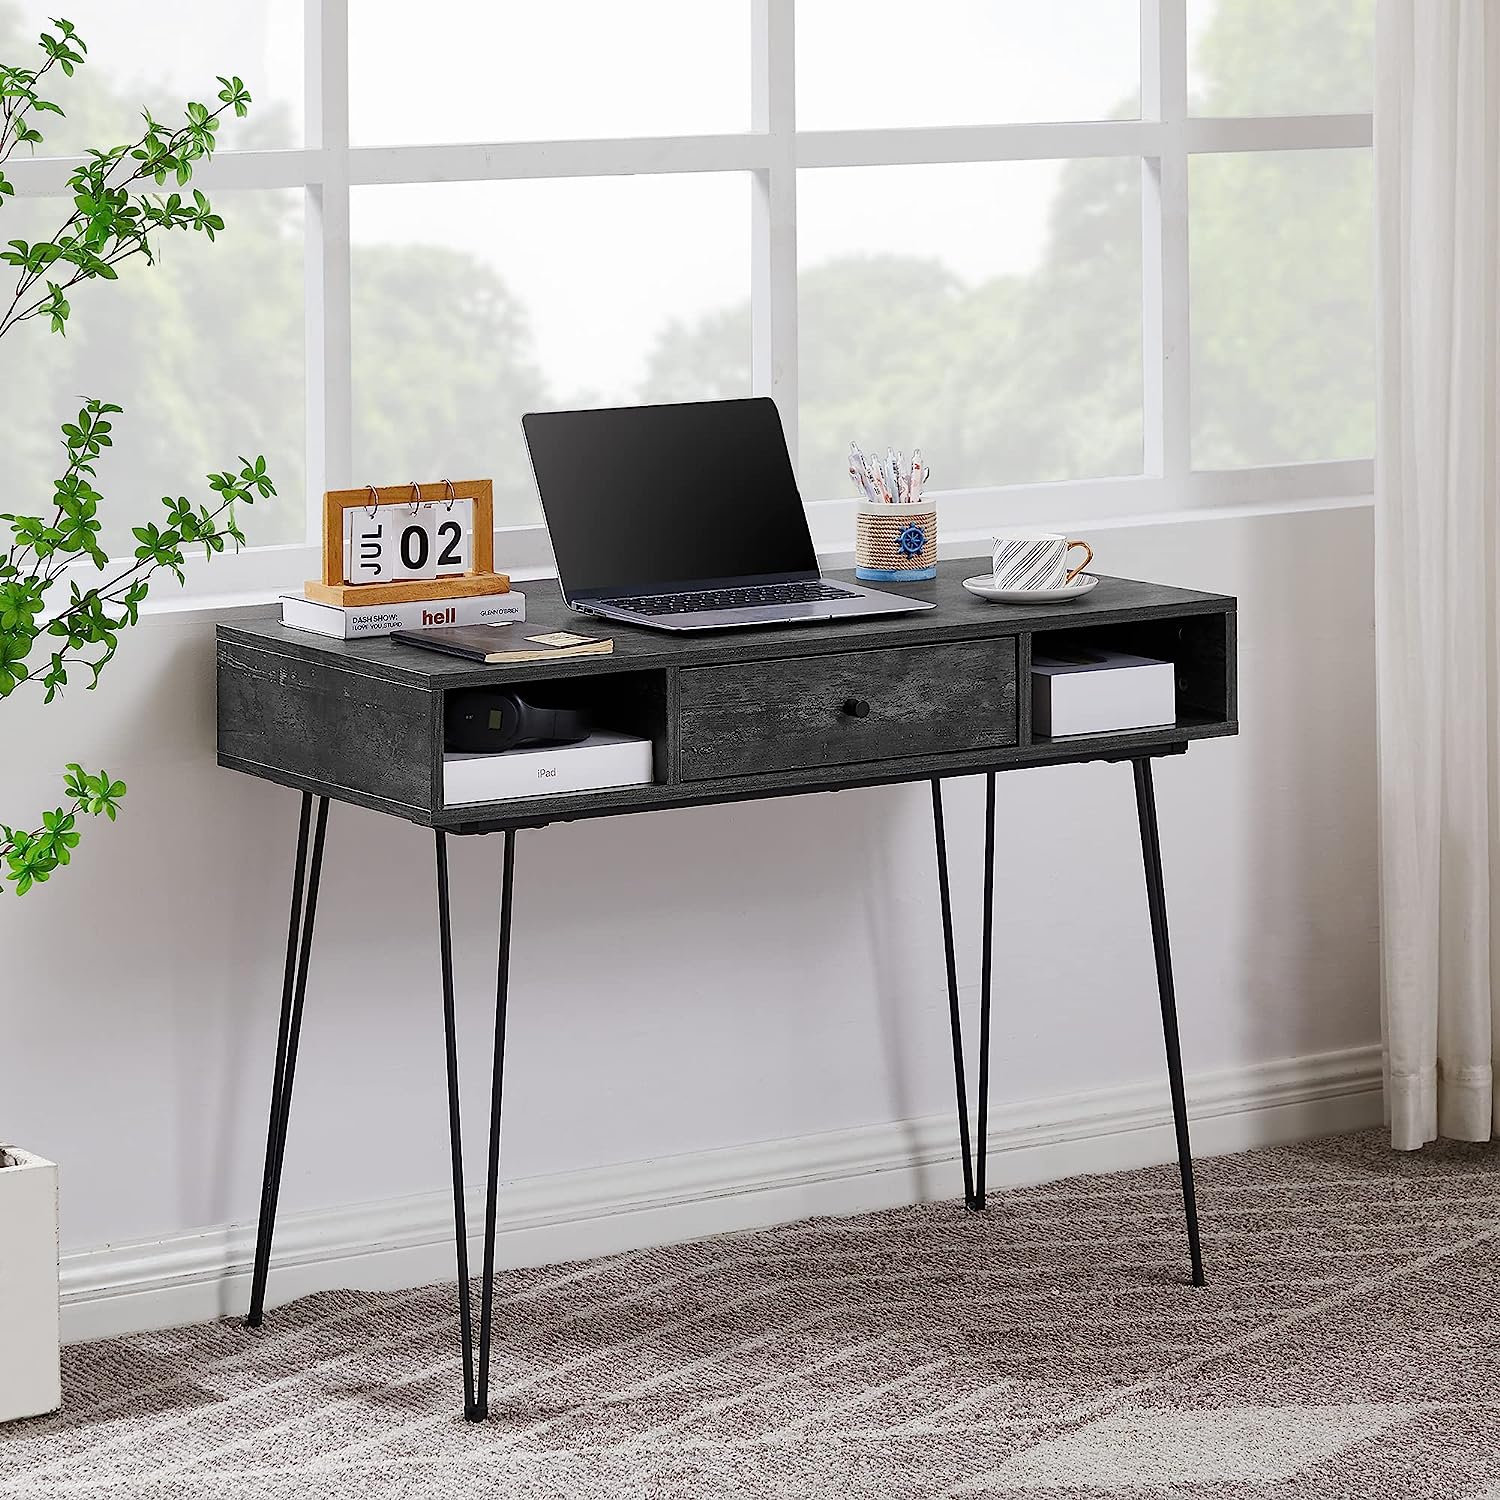 VECELO 39.3" Home Office Work Table with Drawers Computer Desk